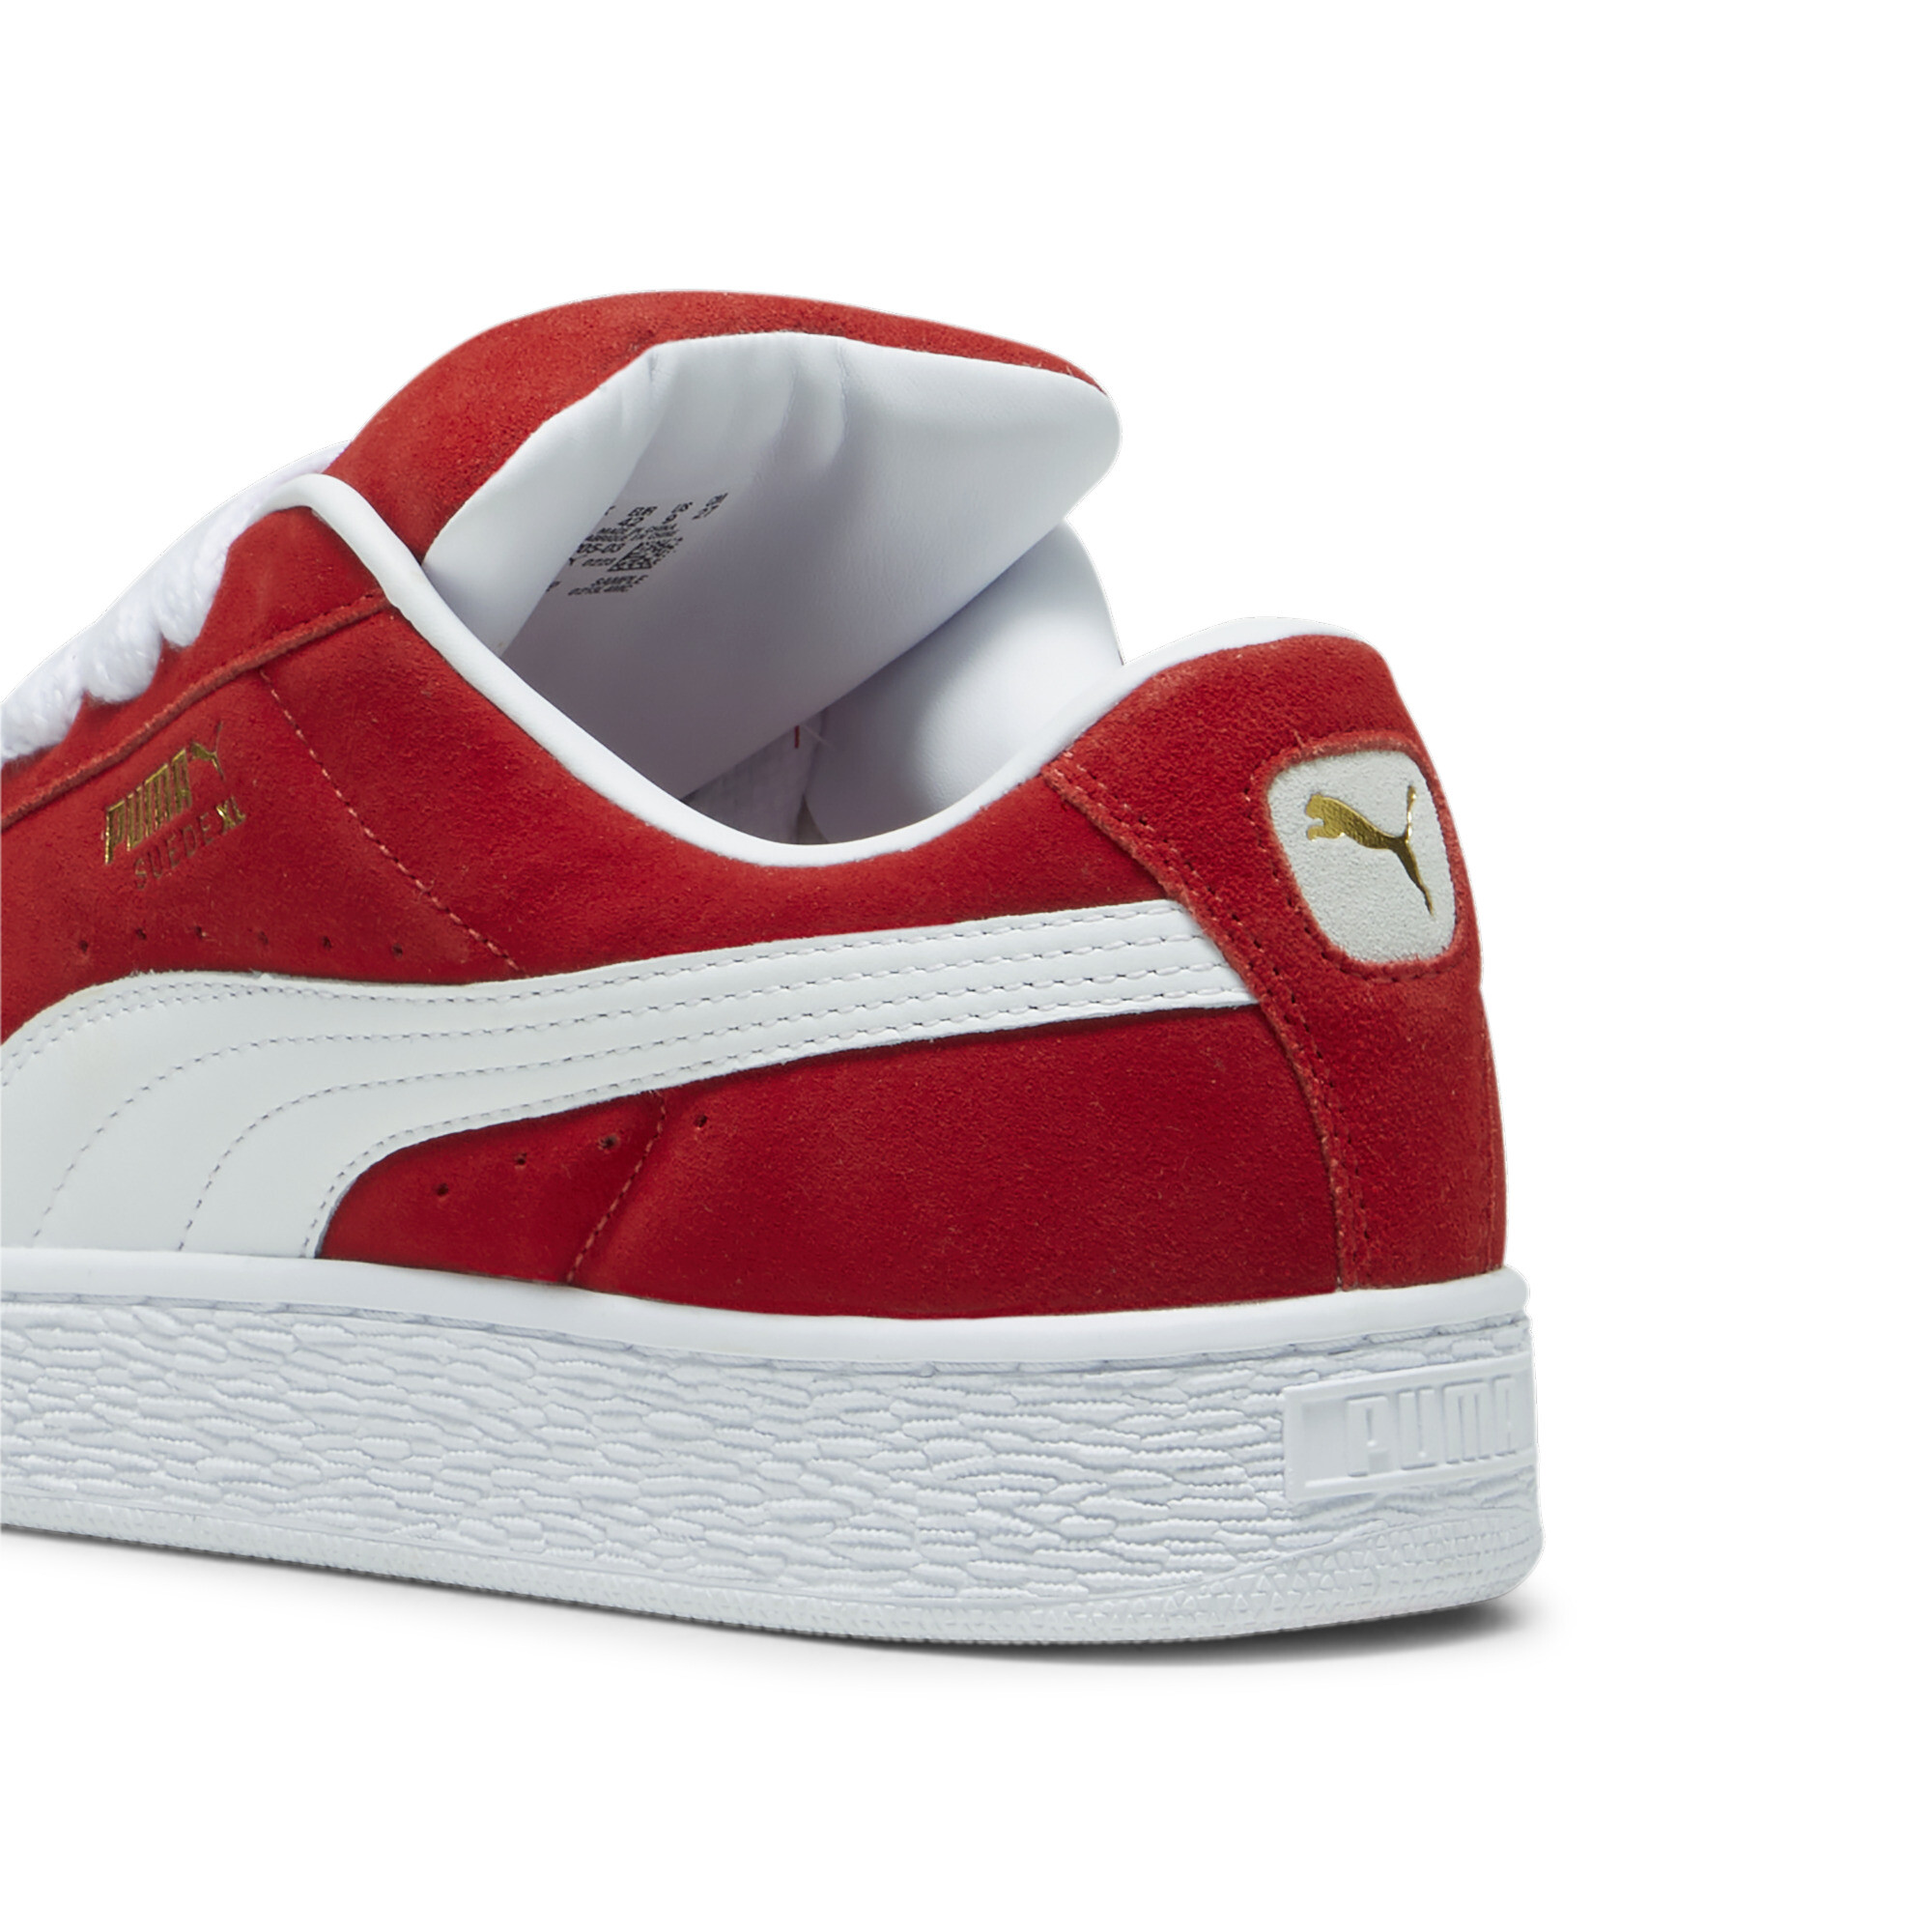 Puma Suede XL Sneakers Unisex, Red, Size 36, Shoes